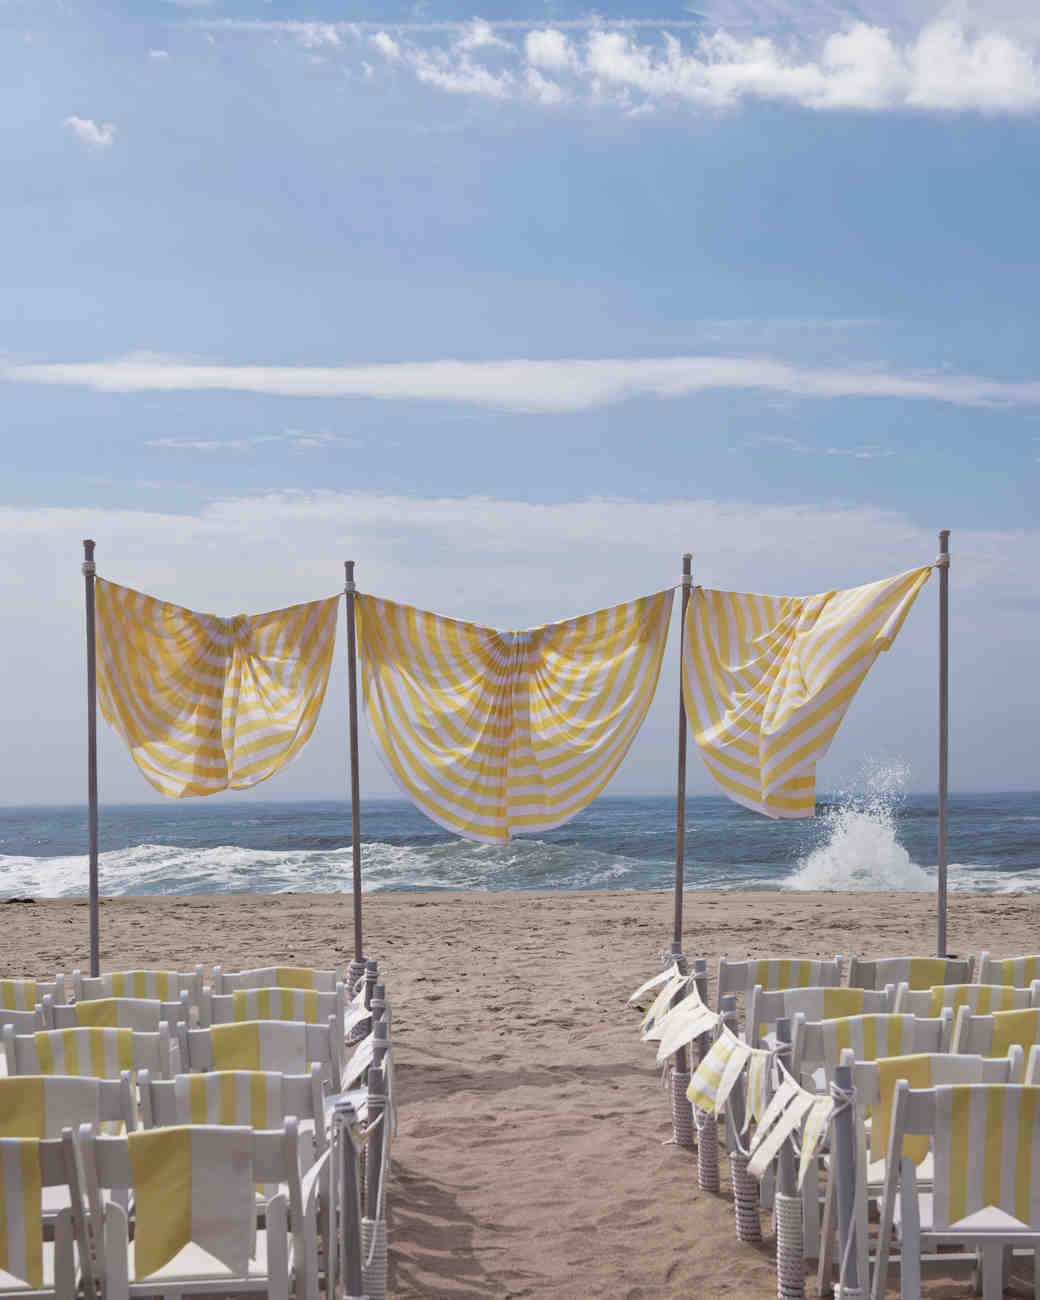 Simple Beach Wedding Ideas
 Outdoor Wedding Decorations That Are Easy to DIY